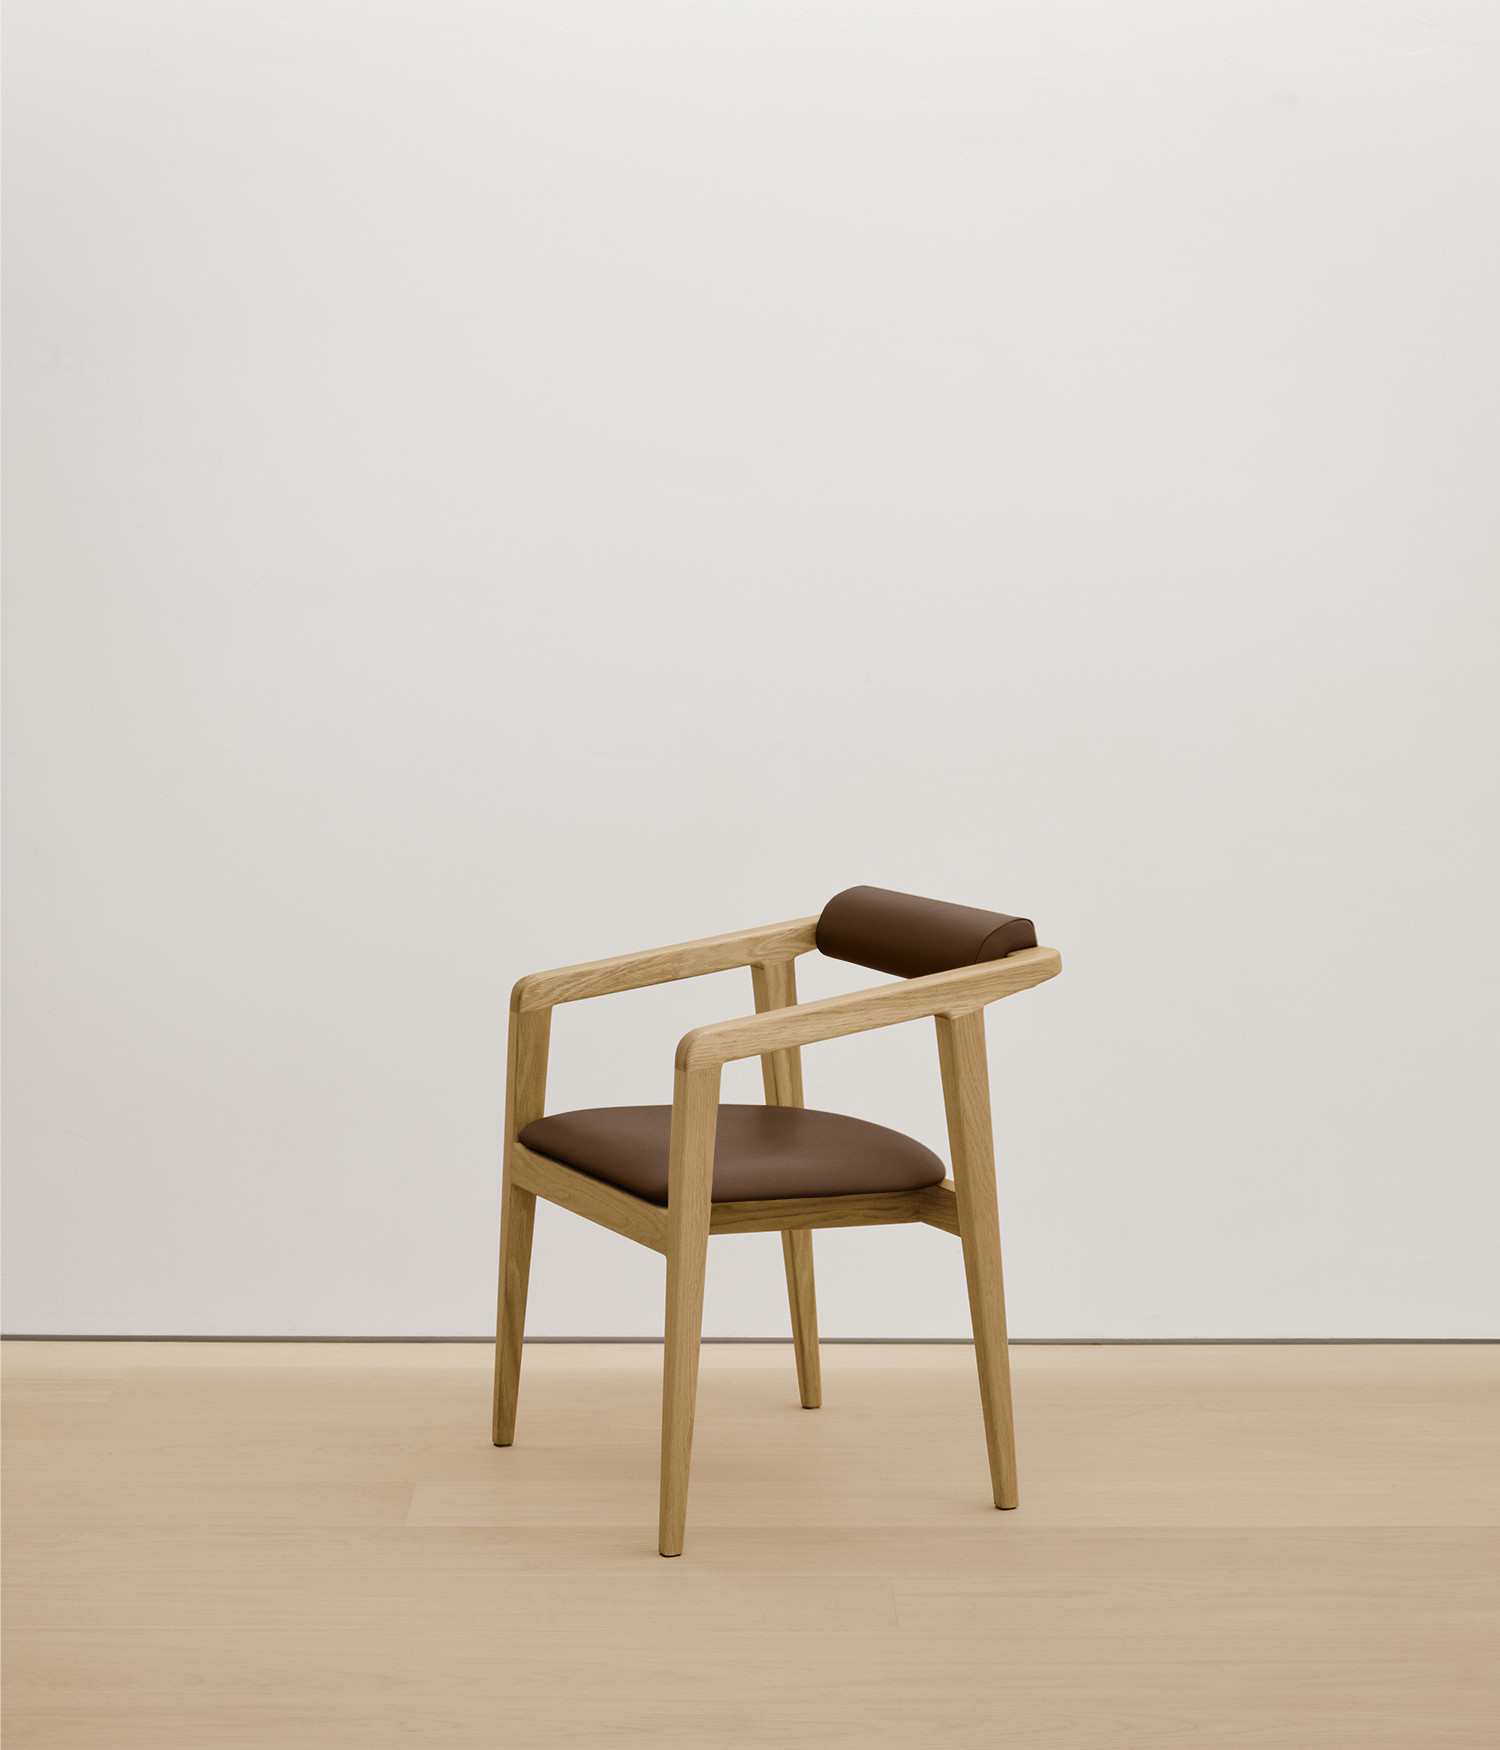  white-oak chair with umber color upholstered seat